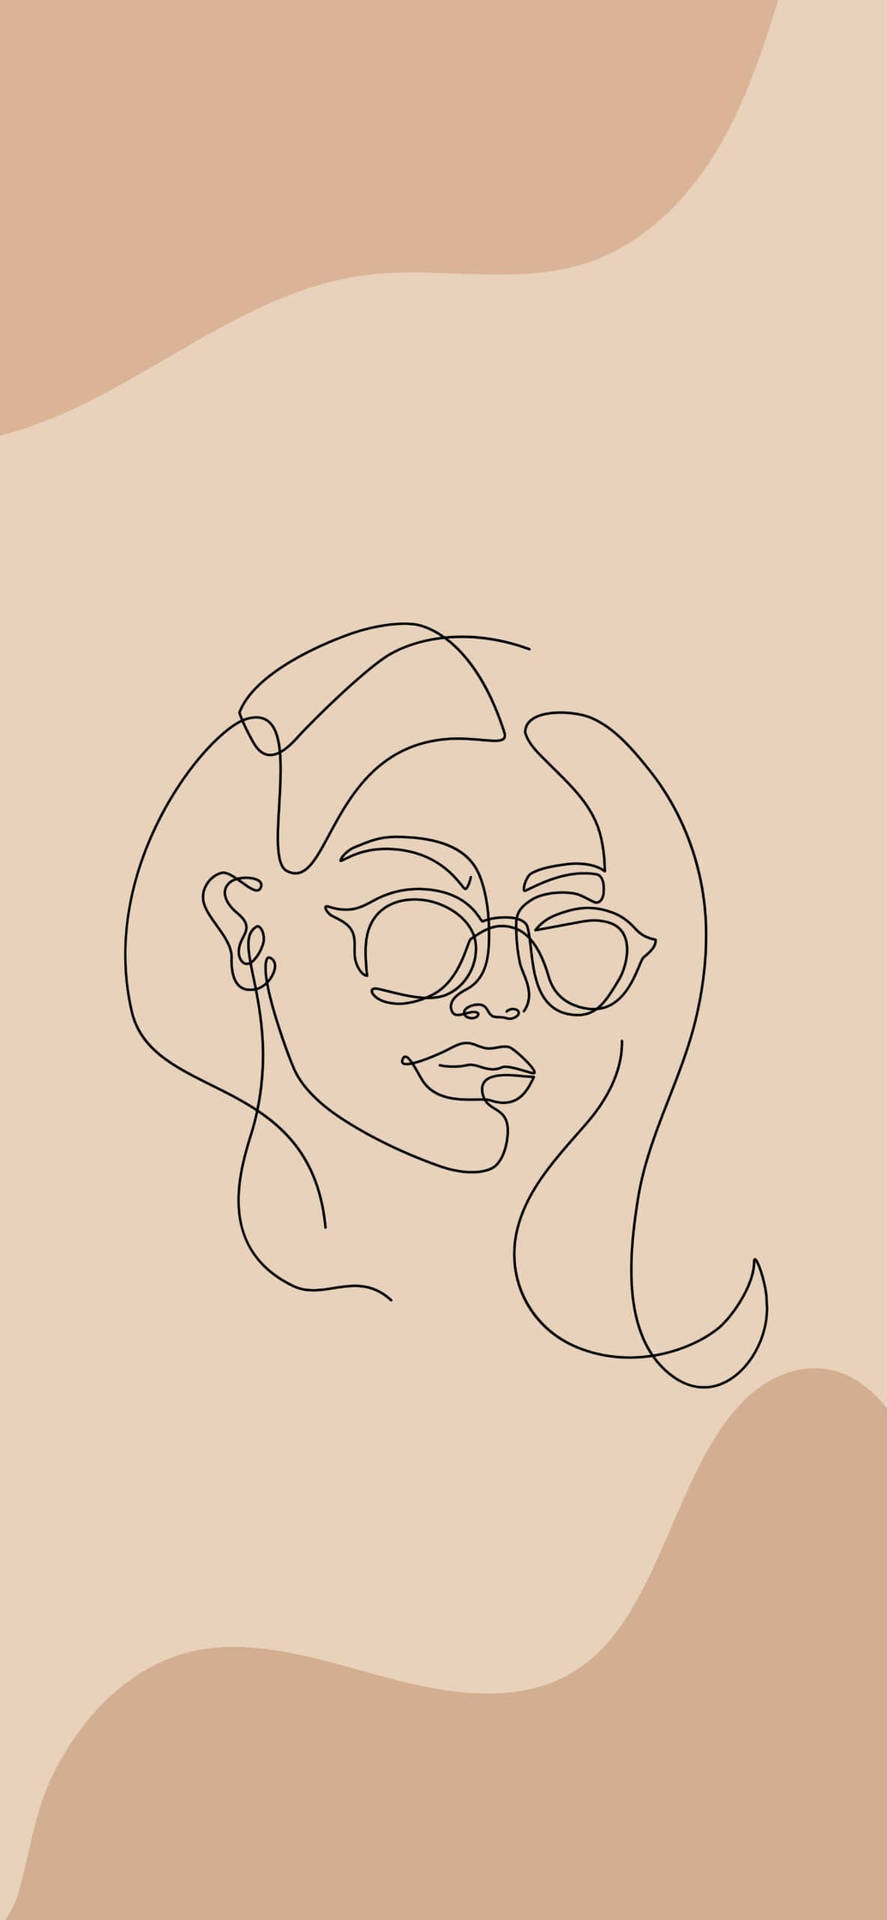 One Line Drawing Woman In Sunglasses Wallpaper